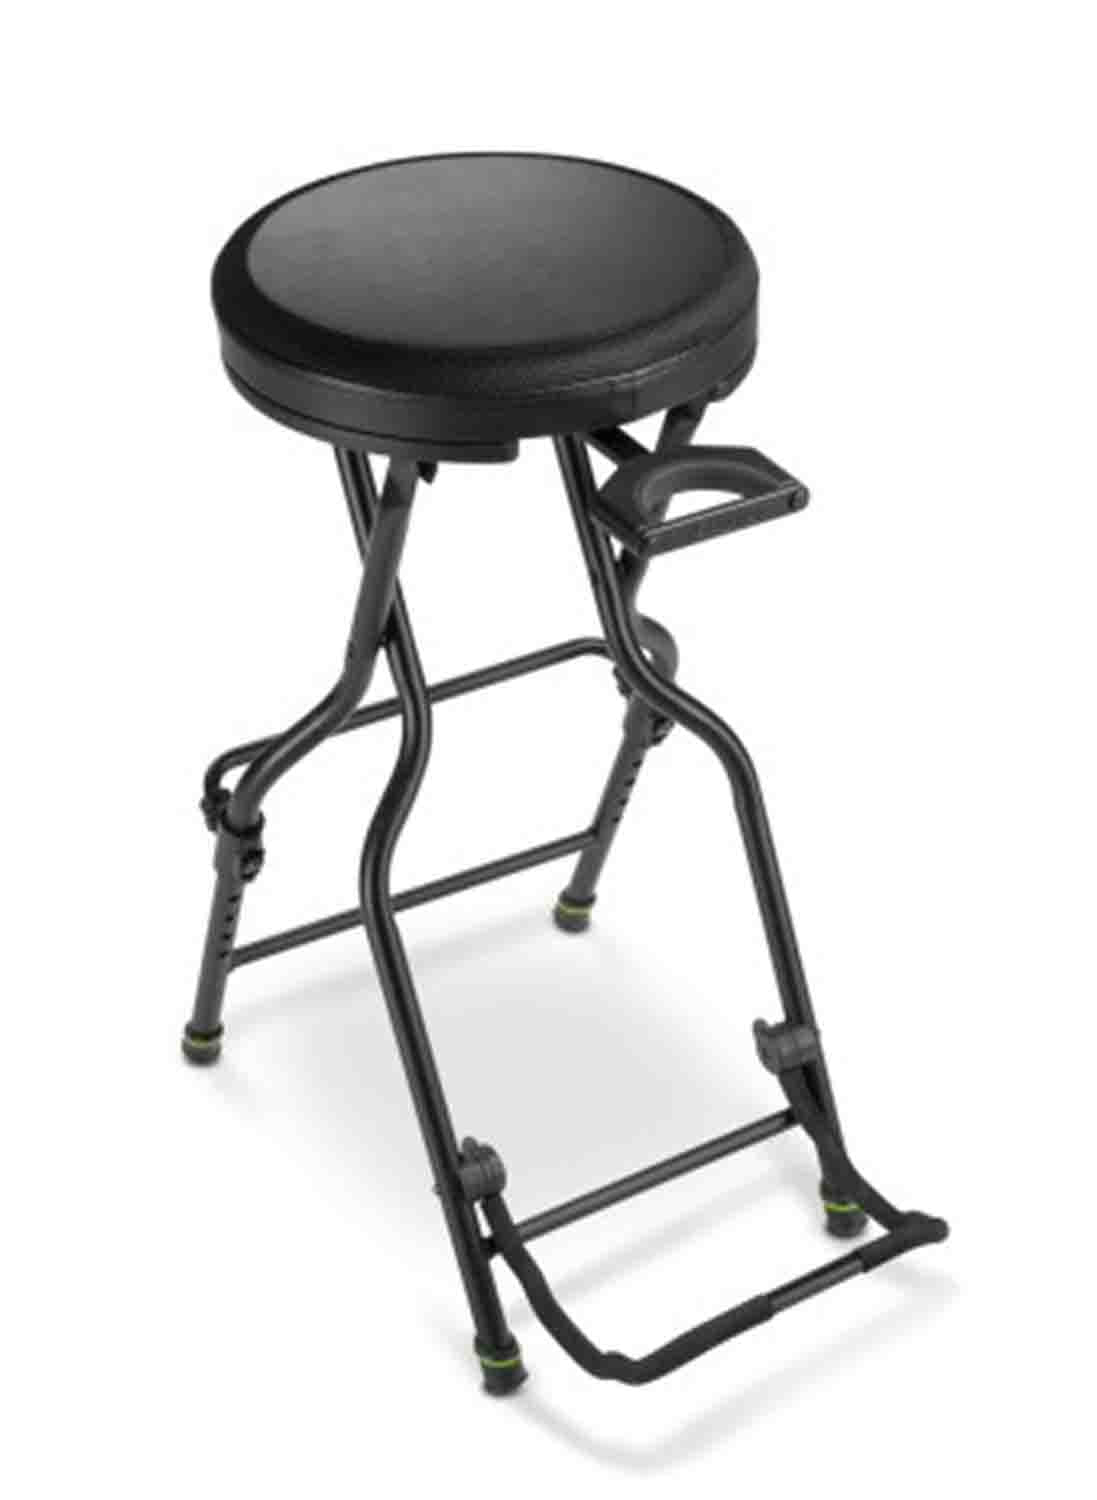 B-Stock: Gravity FG SEAT 1 Musician Seat with Guitar Stand by Gravity